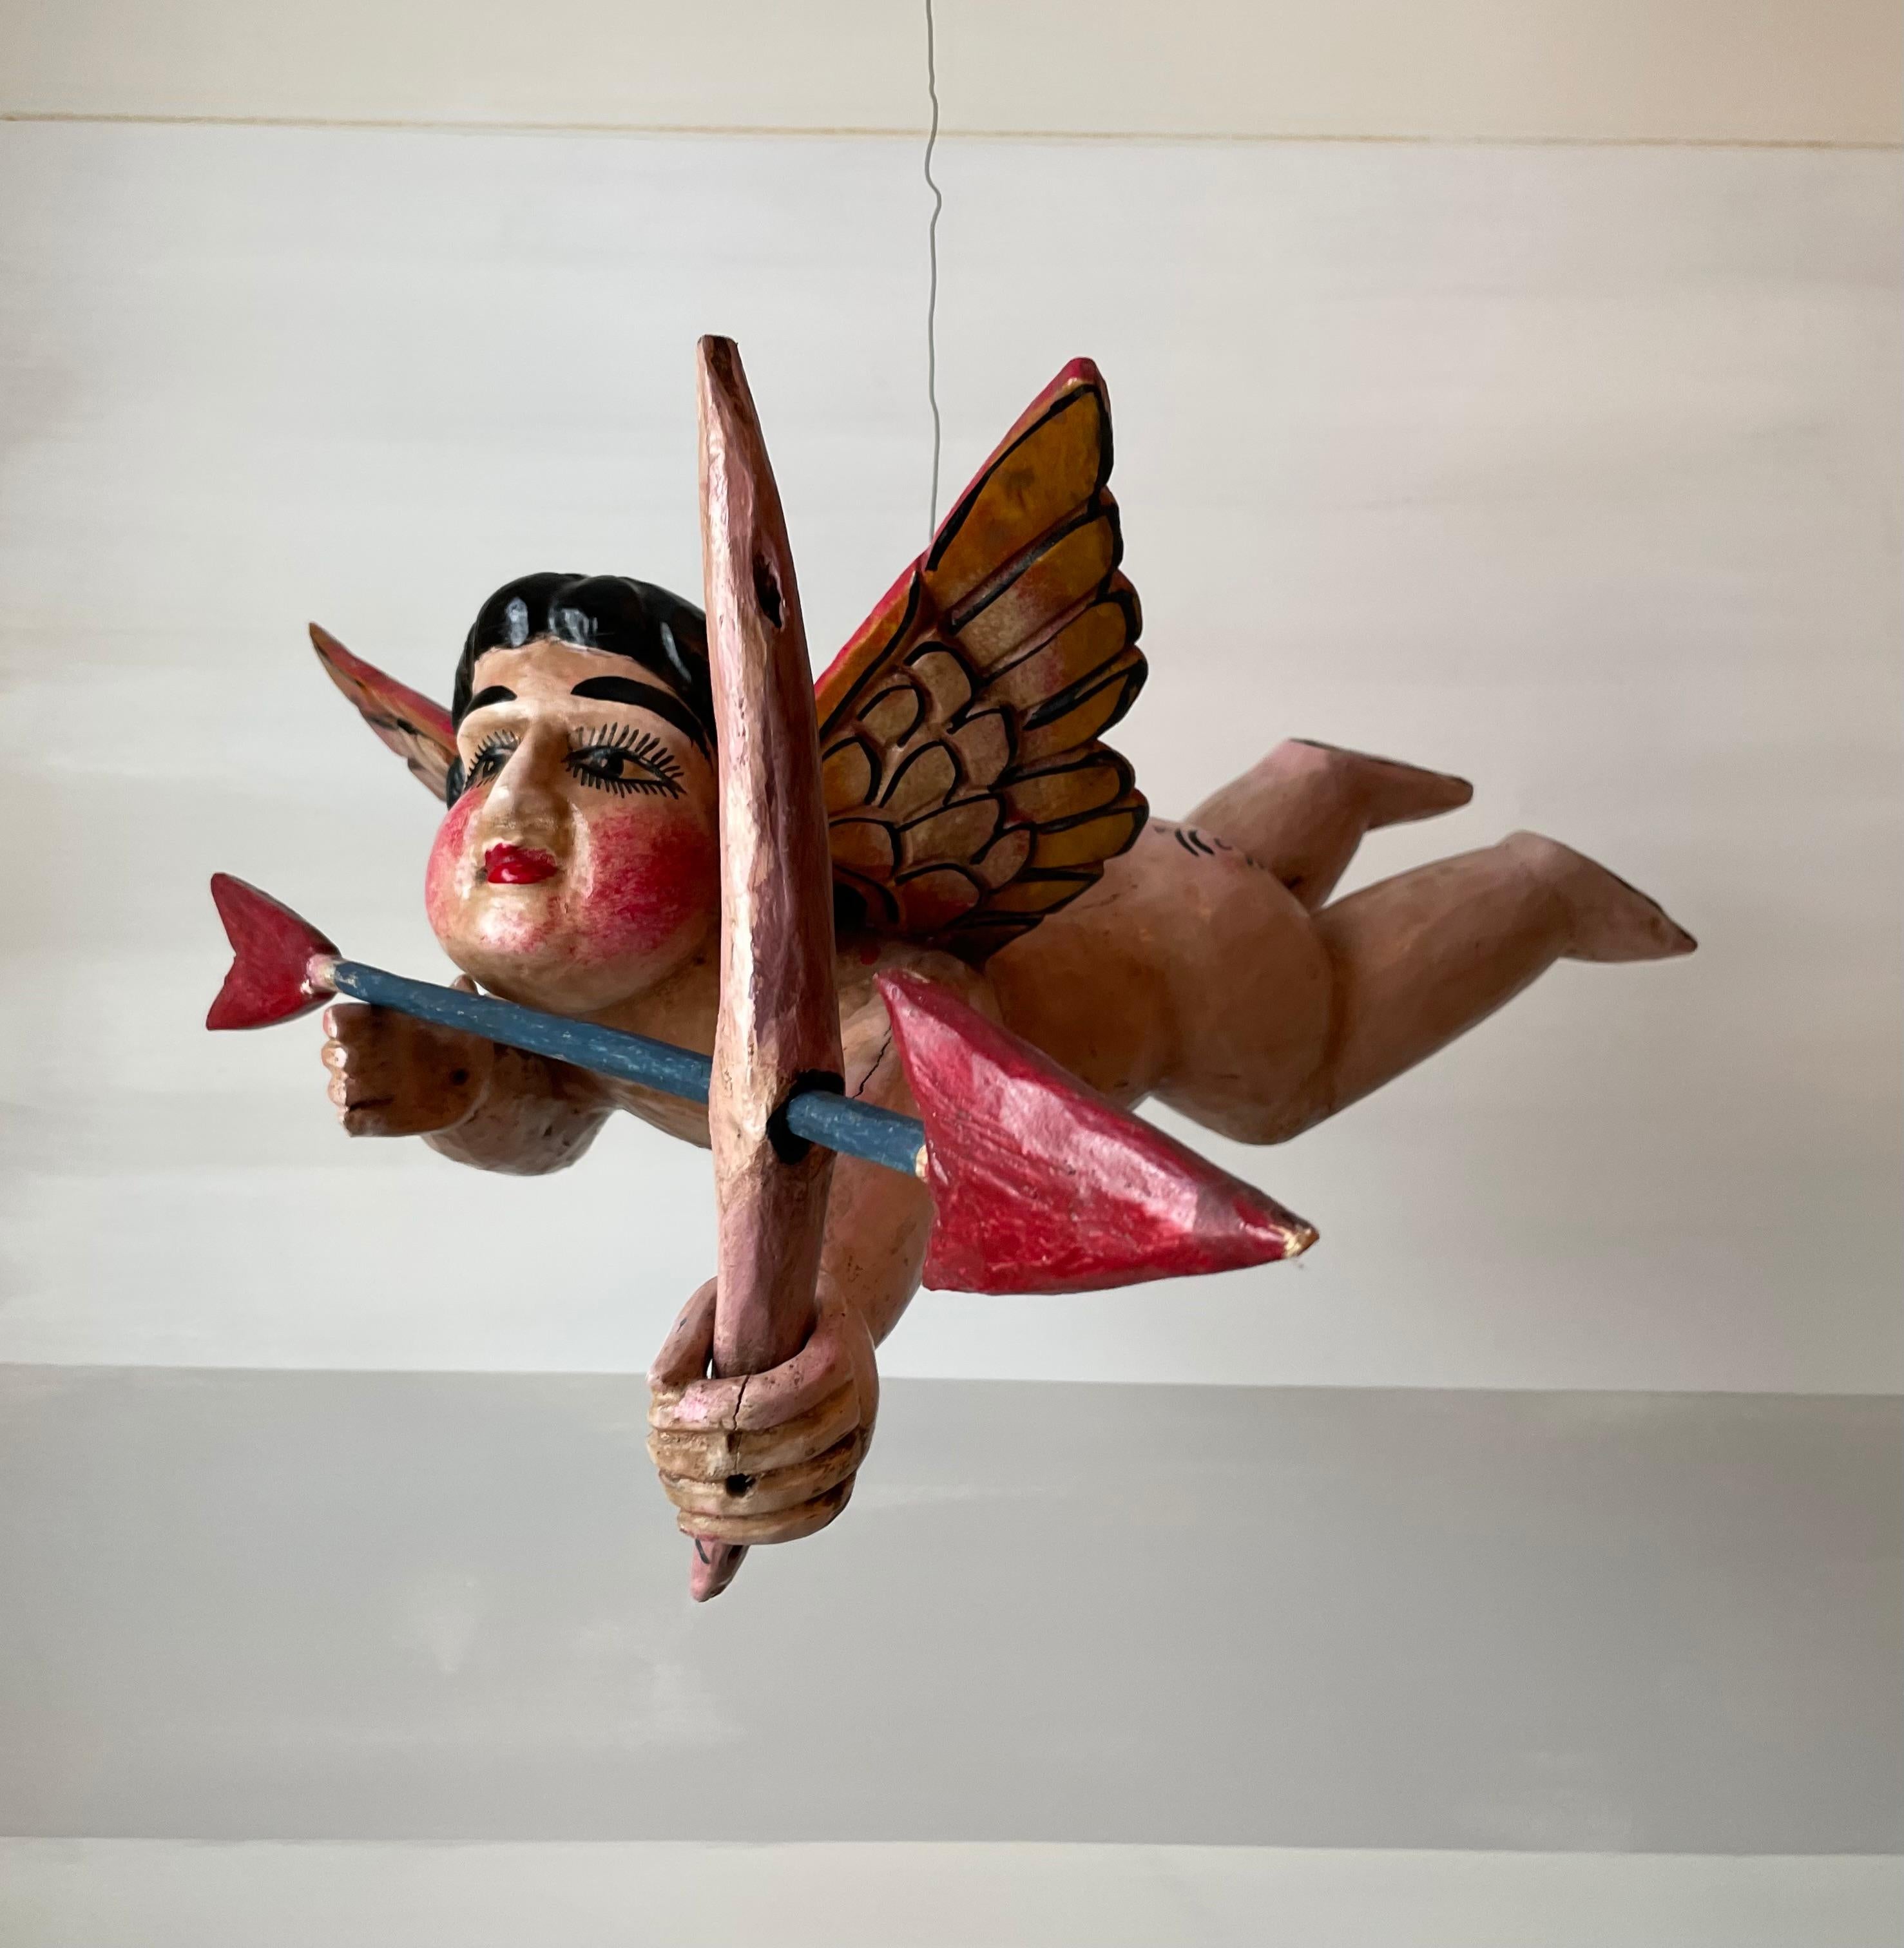 A rosy-cheeked wooden cupid to bring love into your life. This is a unique, hand-carved, hand-painted wooden cupid with a wire suspension and removable wooden bow and arrow. 

At 25